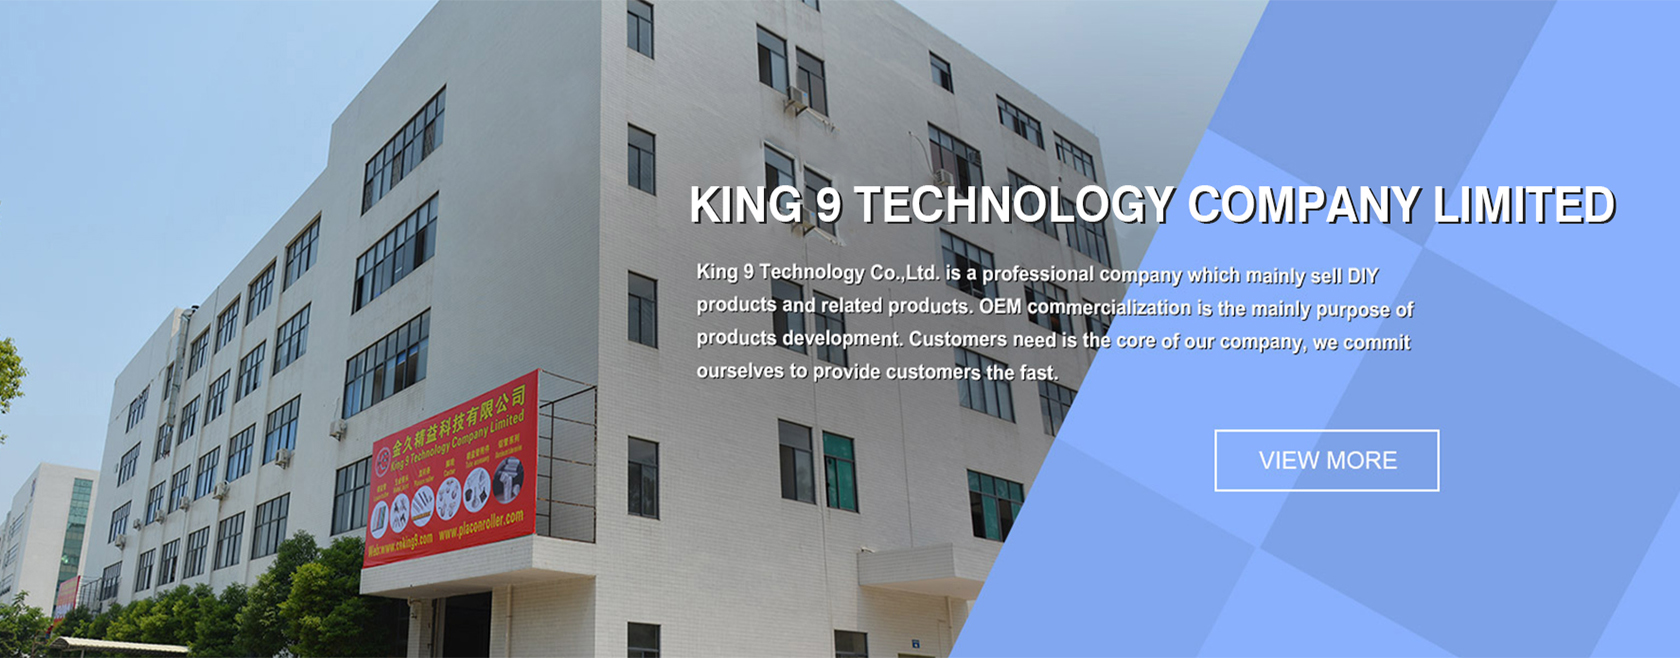 King 9 Technology Company Limited